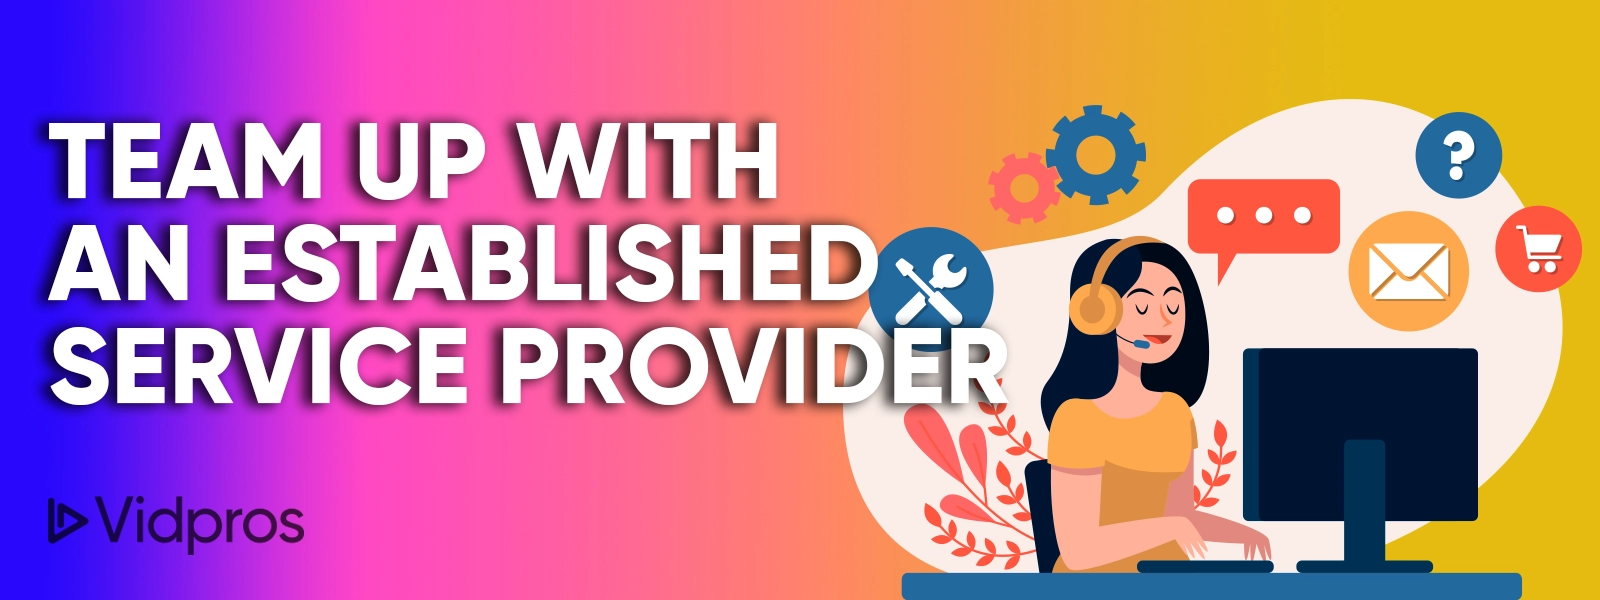 Team Up with an Established Service Provider